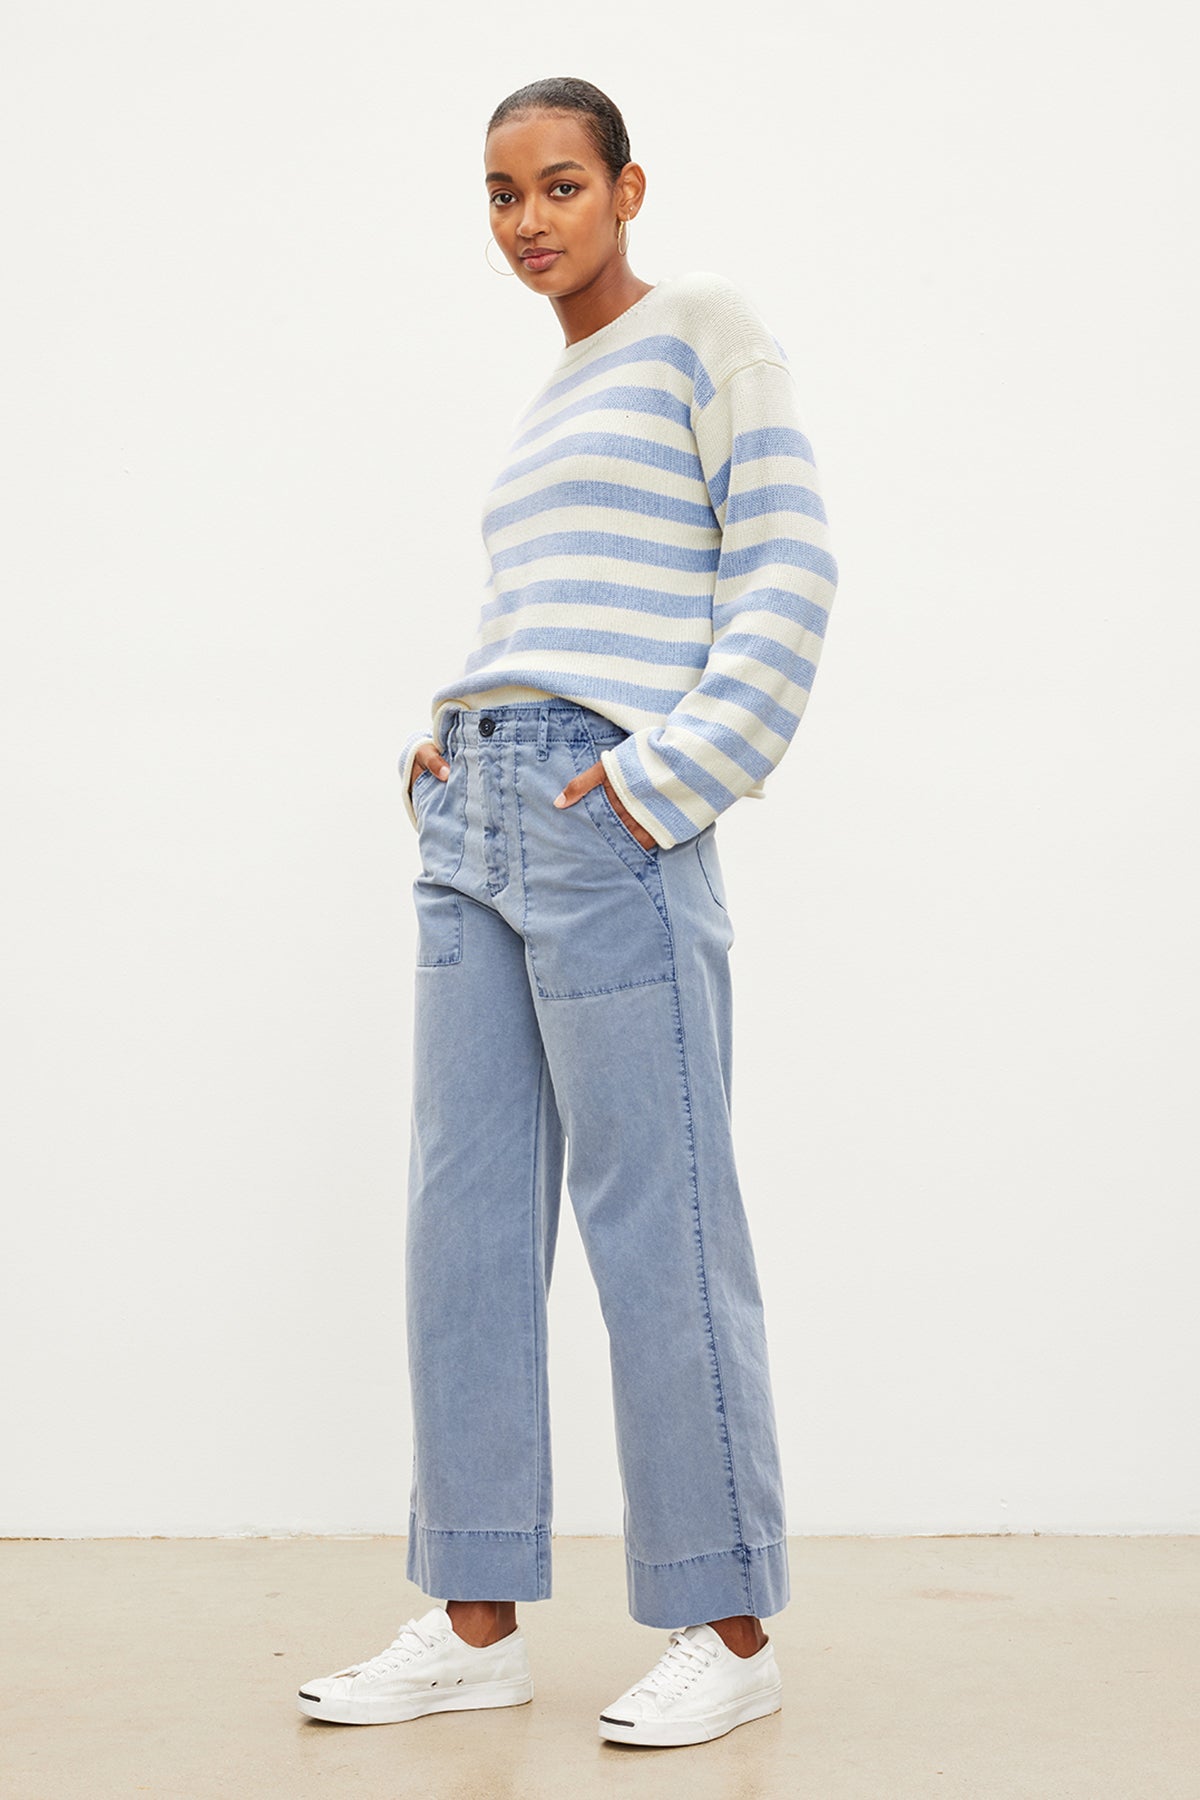 The model is wearing MYA COTTON CANVAS PANTS by Velvet by Graham & Spencer in blue and white stripes, paired with a striped sweater and jeans.-35983056306369